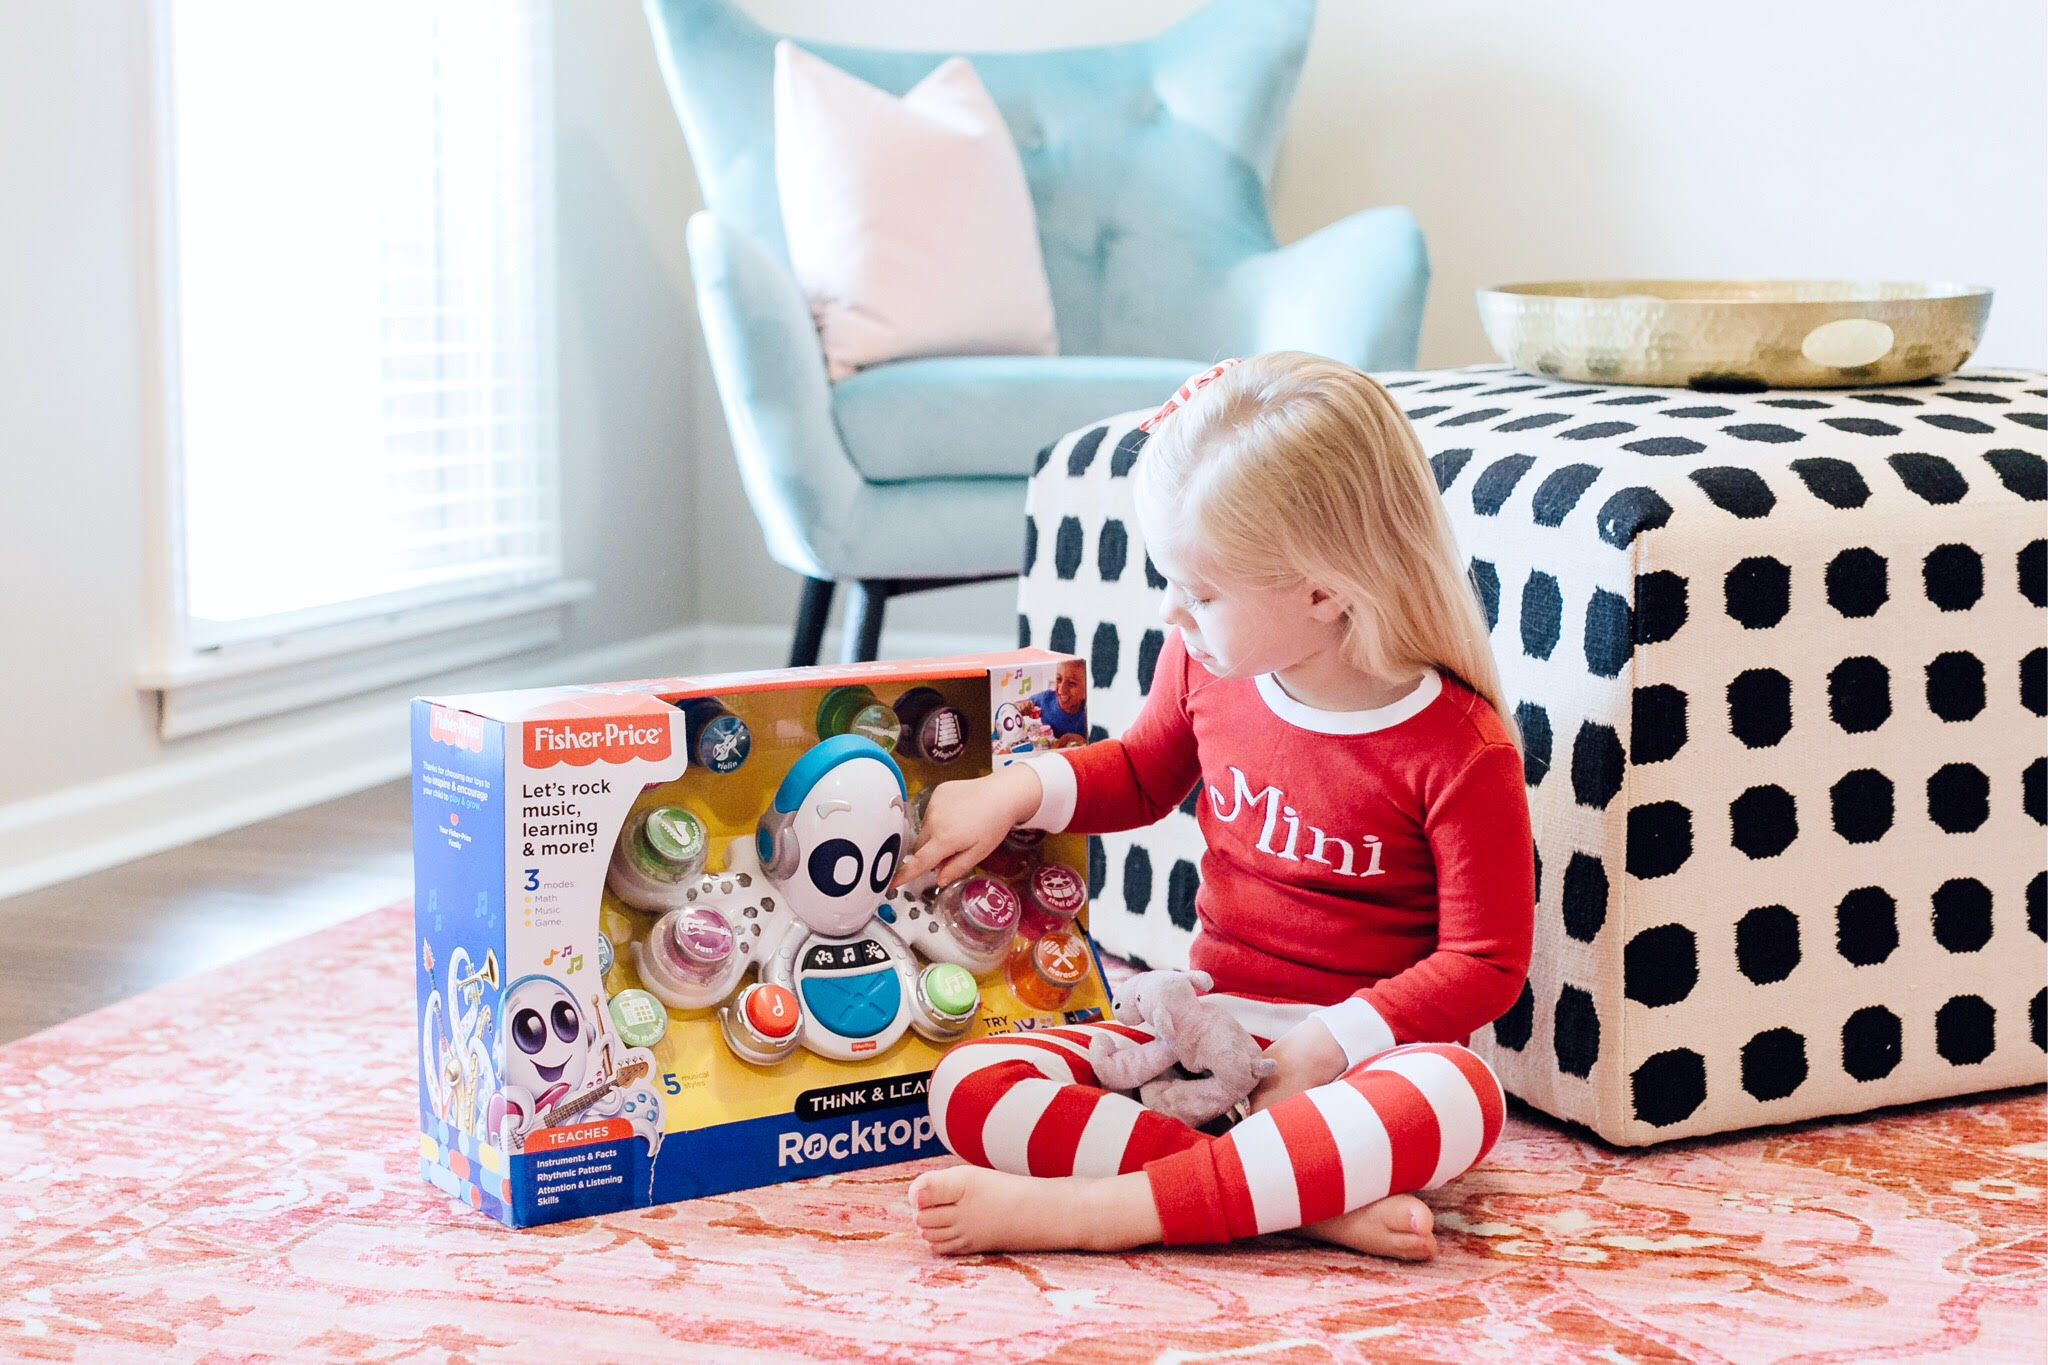 Top 10 Best Toys for Toddlers to Buy this Christmas featured by top US lifestyle blog, Walking in Memphis in High Heels: image of a mom and daughter duo playing with holiday toys